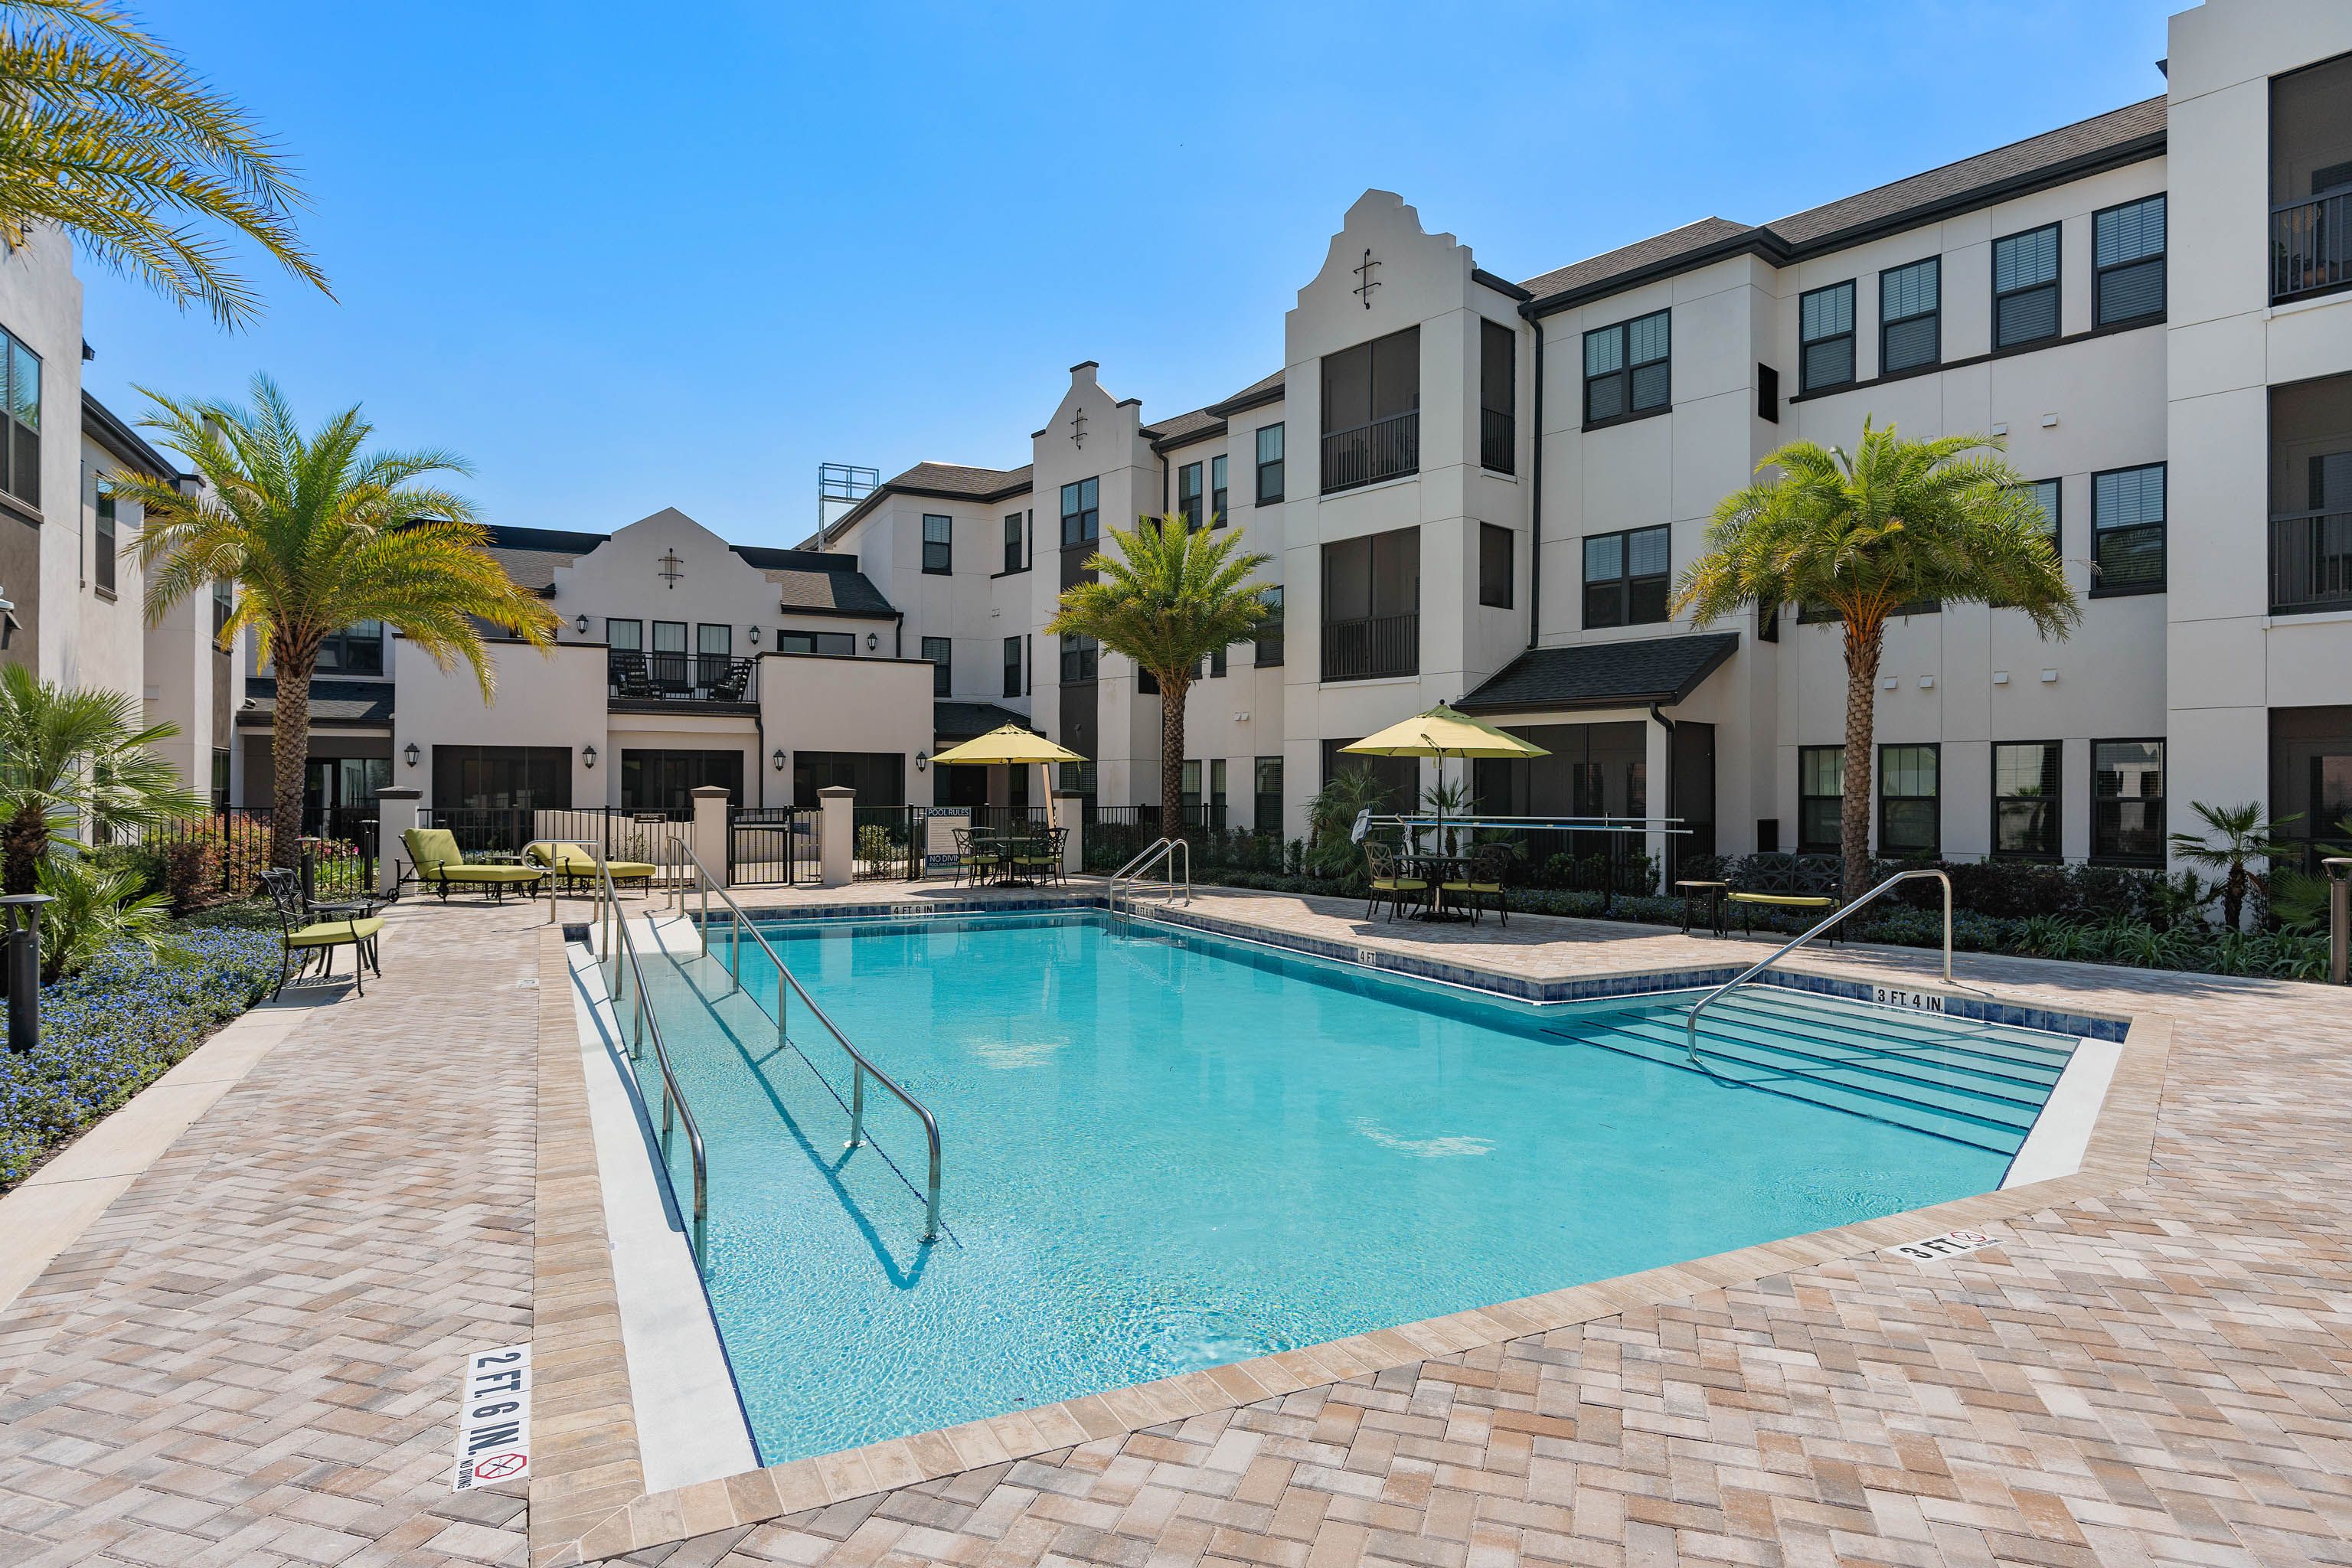 The swimming pool at the Grove at Trelago Assisted Living and Memory Care in Maitland, Fl